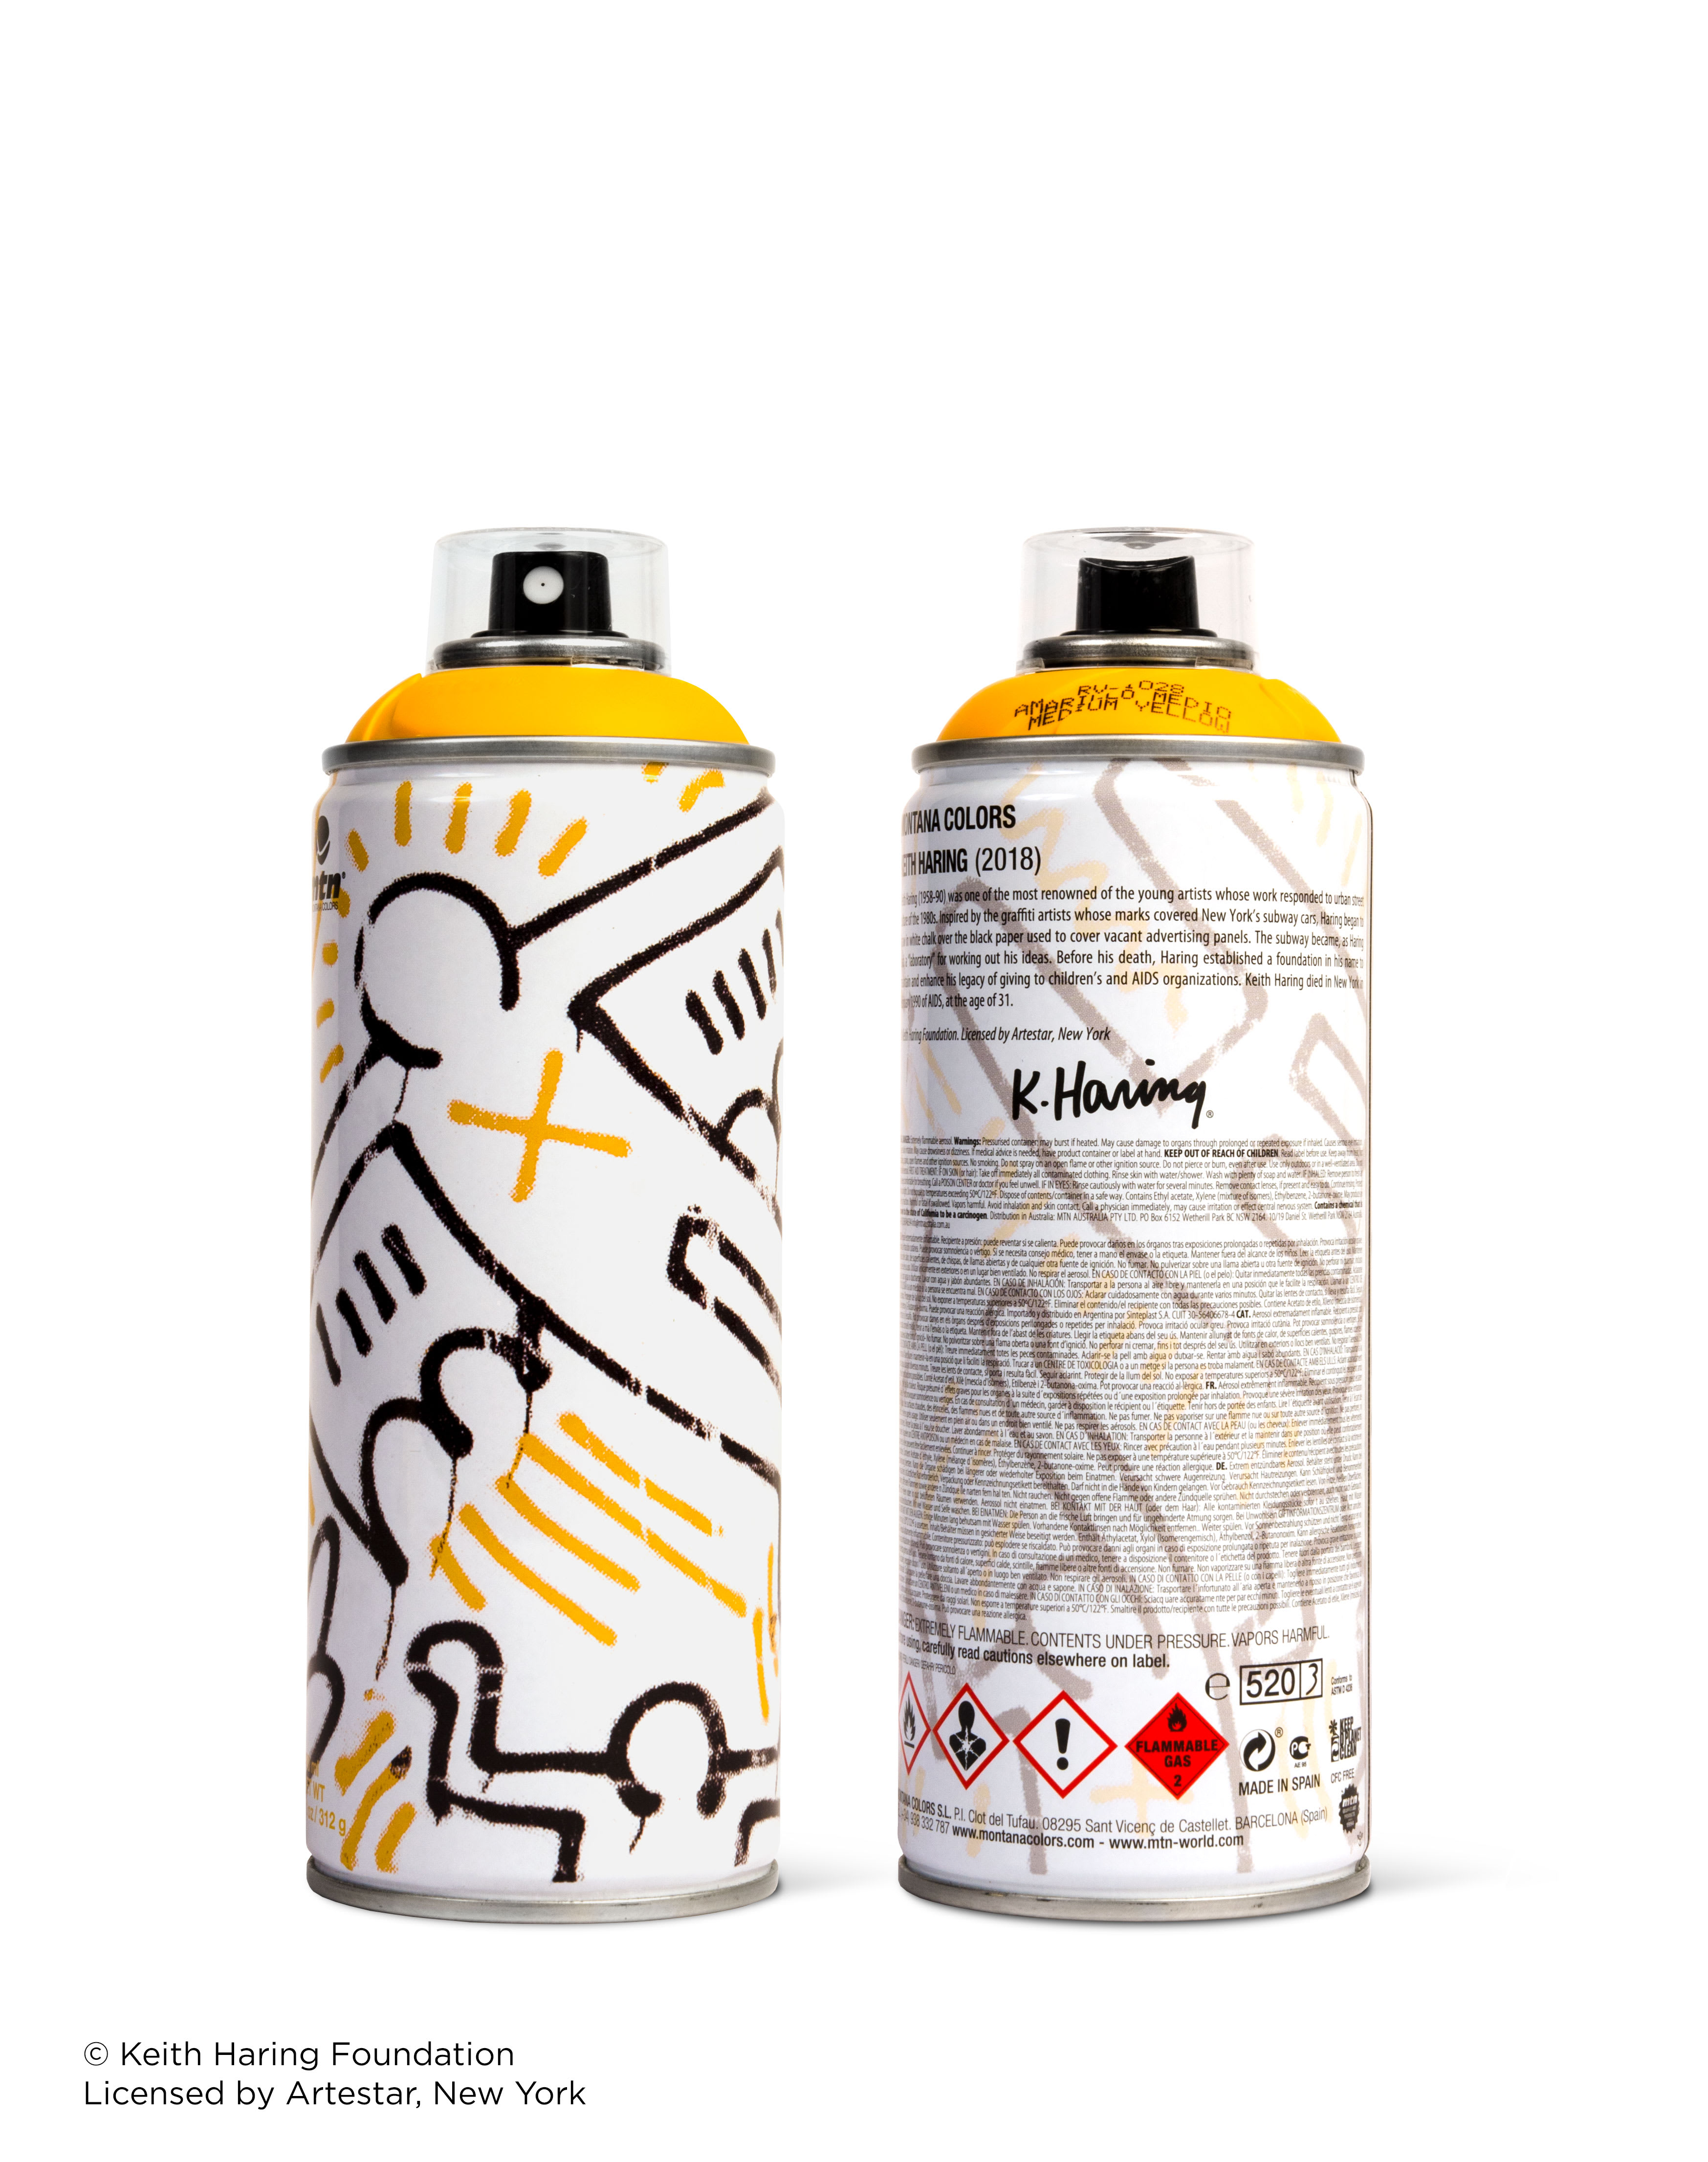 Yellow Keith Haring spray paint can for Beyond The Streets.